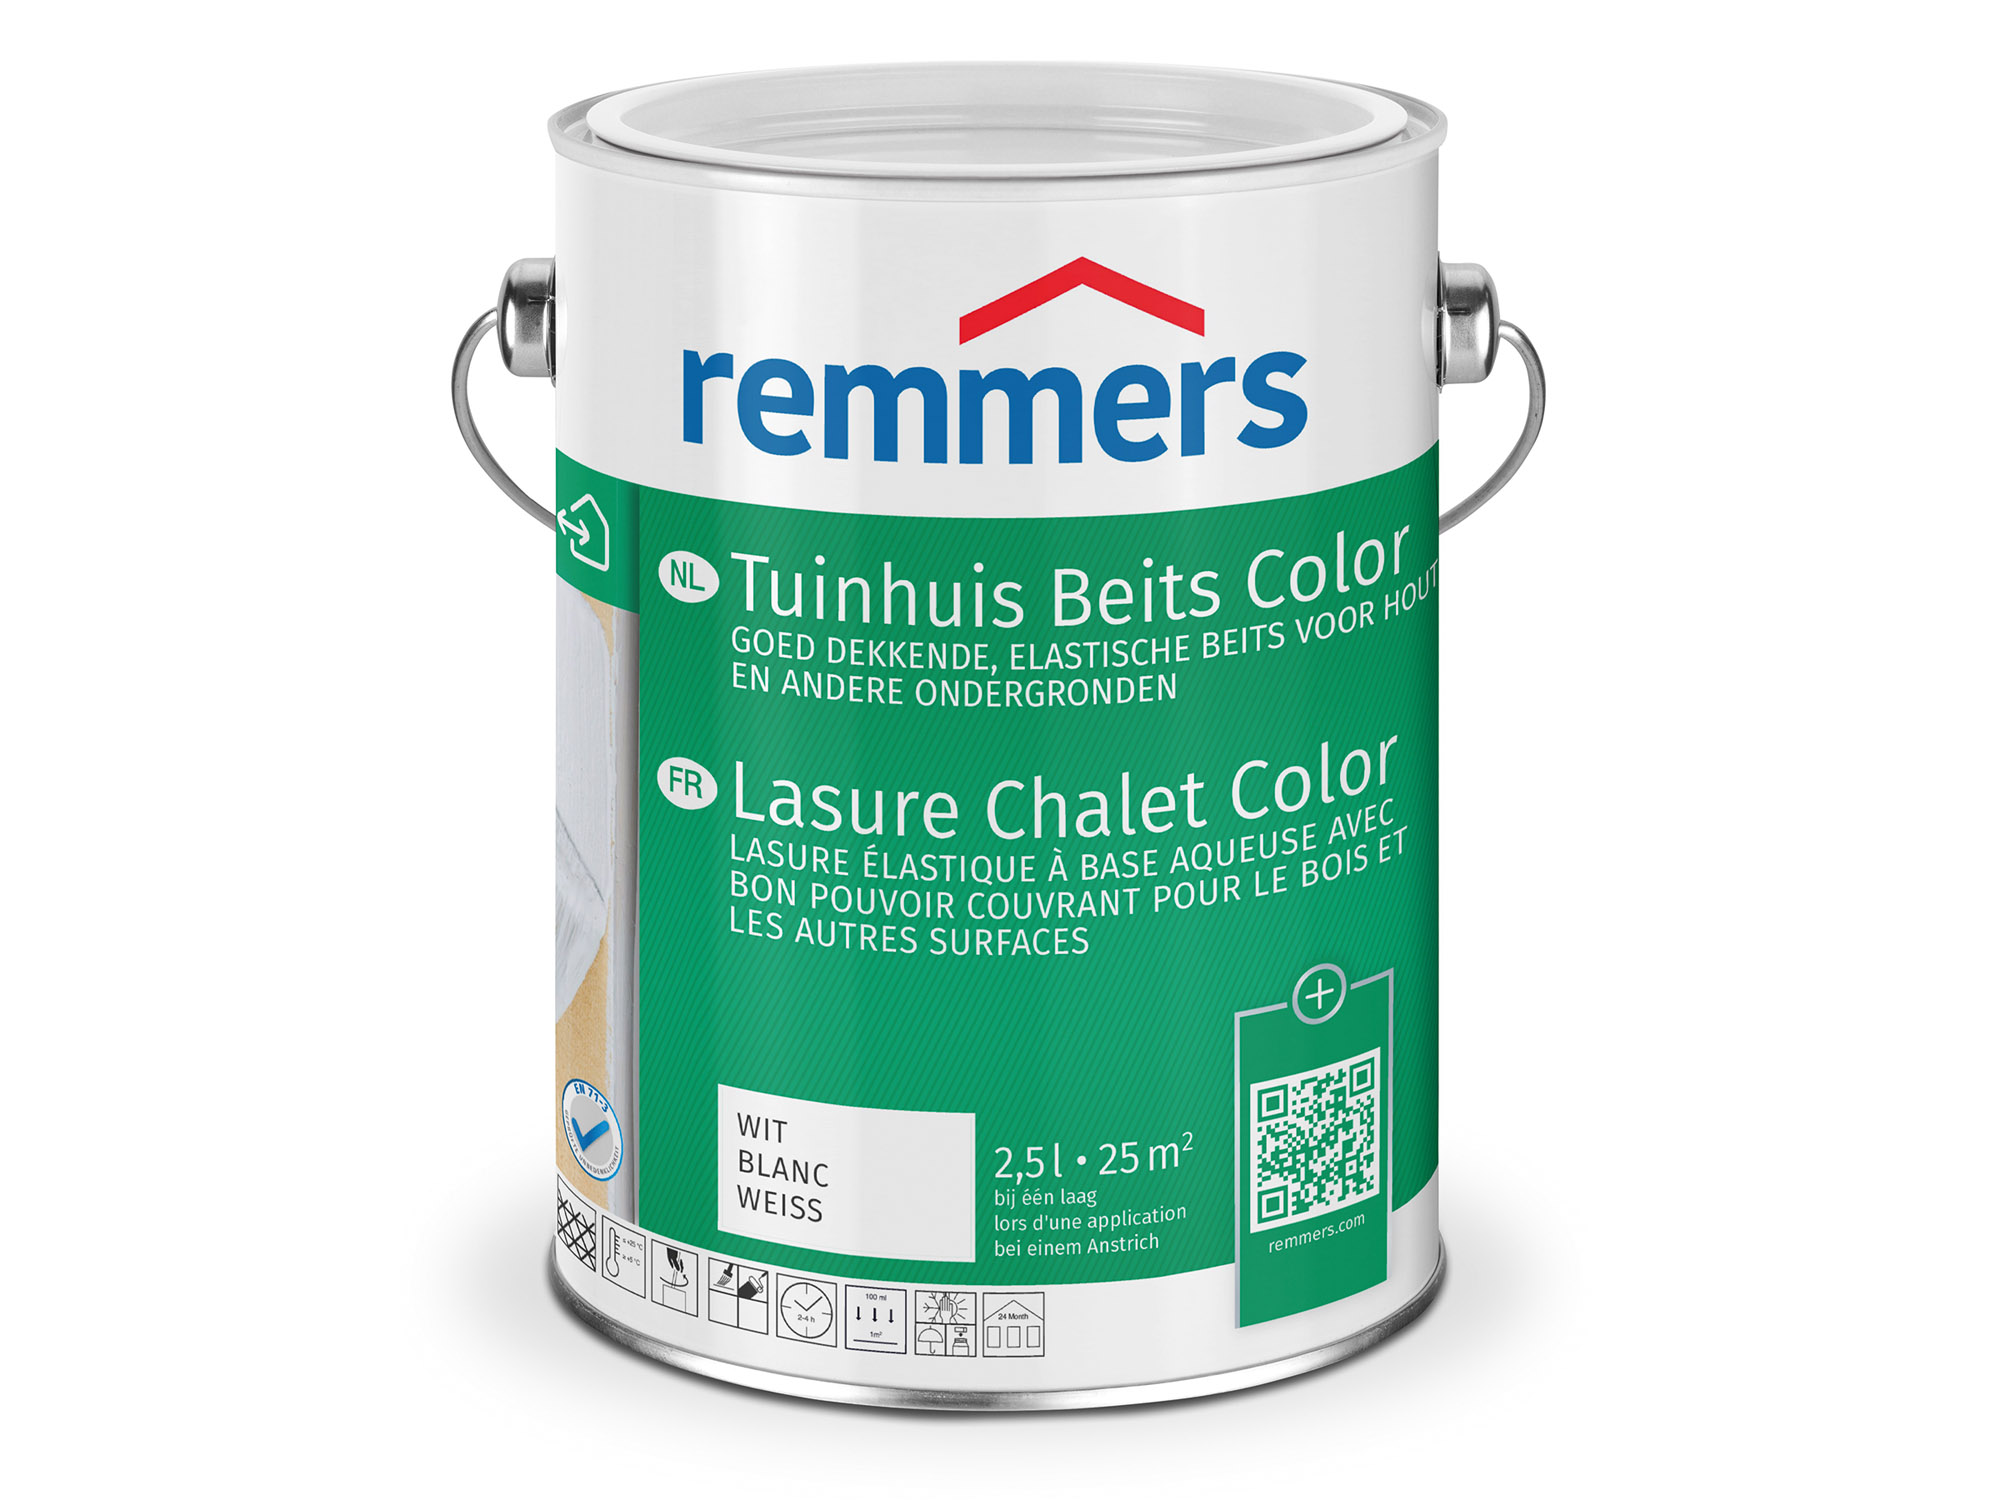 Remmers Tuinhuis Beits Color Koningsblauw